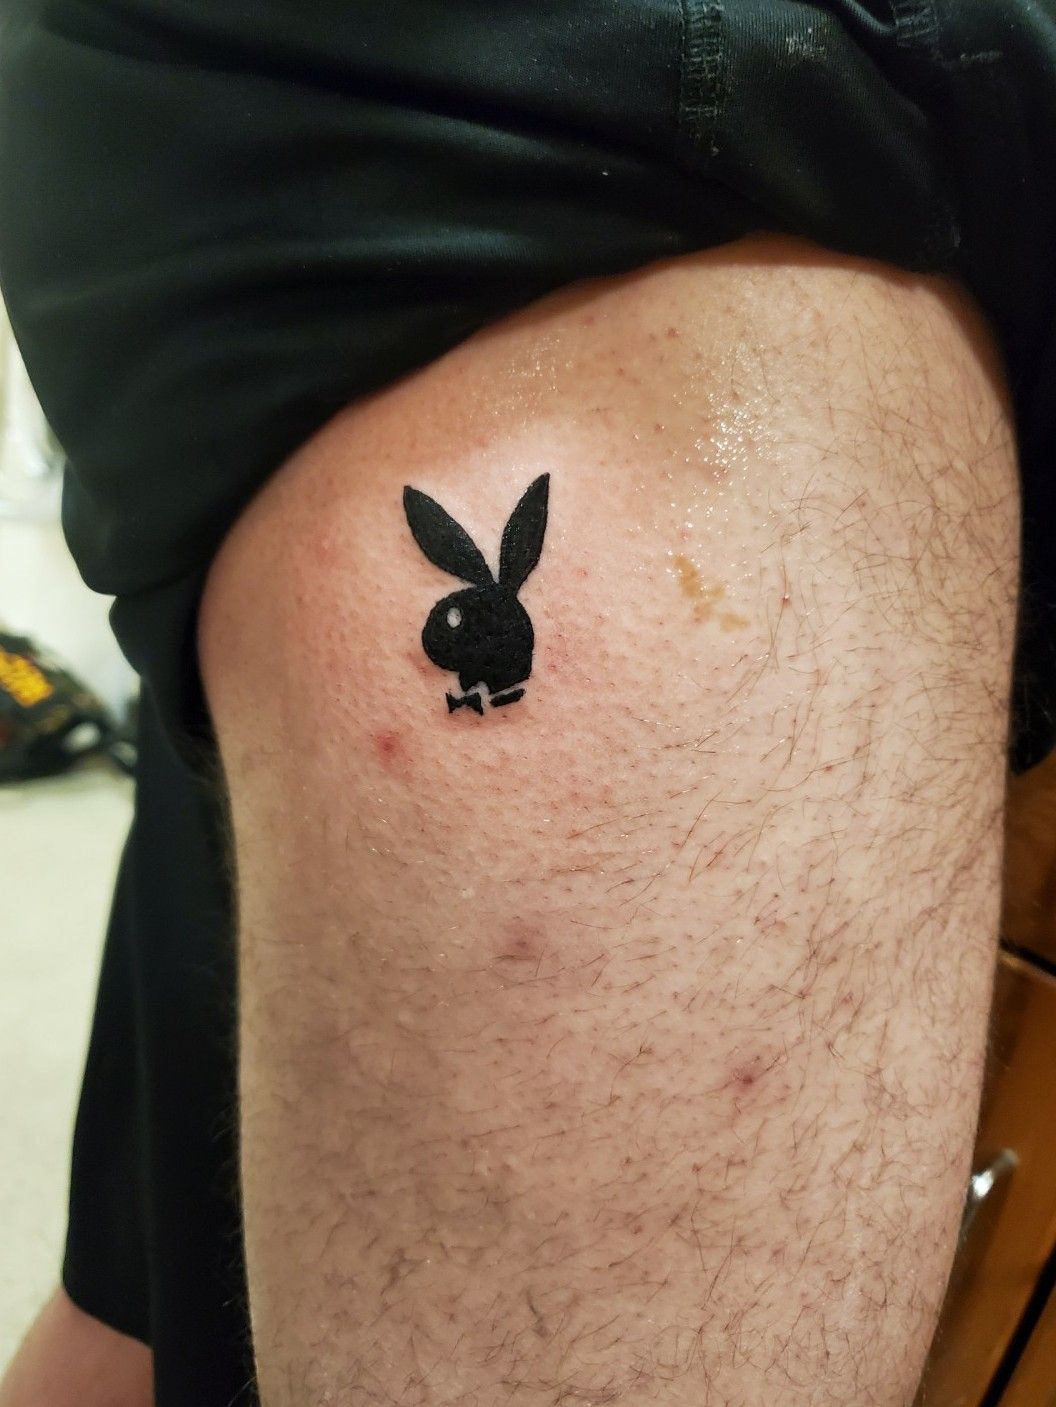 Good by playboy bunny tattoo cover up by Alex black Lillies  By  Mountainside Tattoo  Piercing VT  Facebook